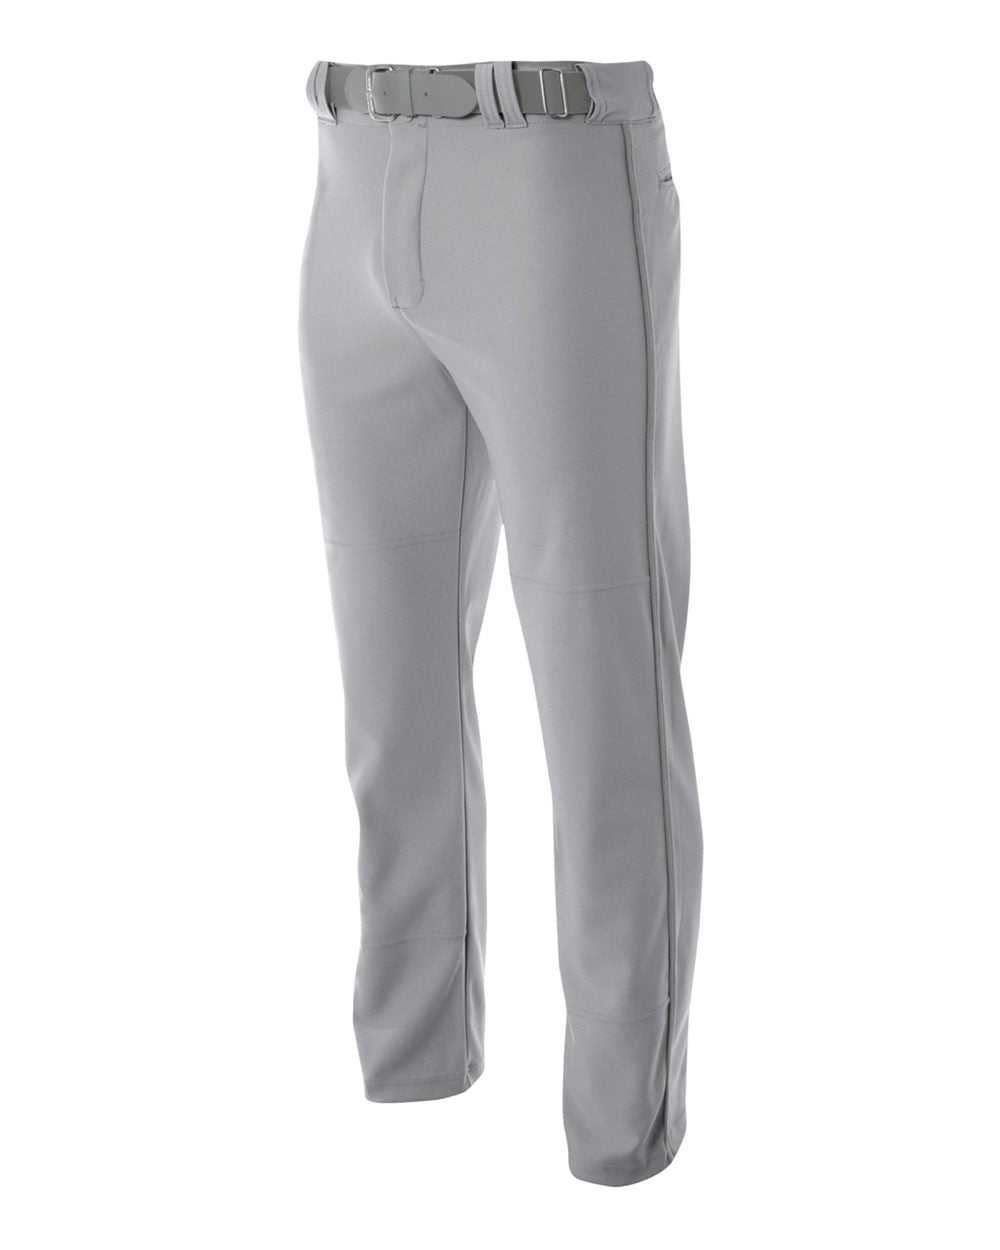 A4 NB6162 Youth Pro Style Open Bottom Baggy Cut Baseball Pant - Gray - HIT a Double